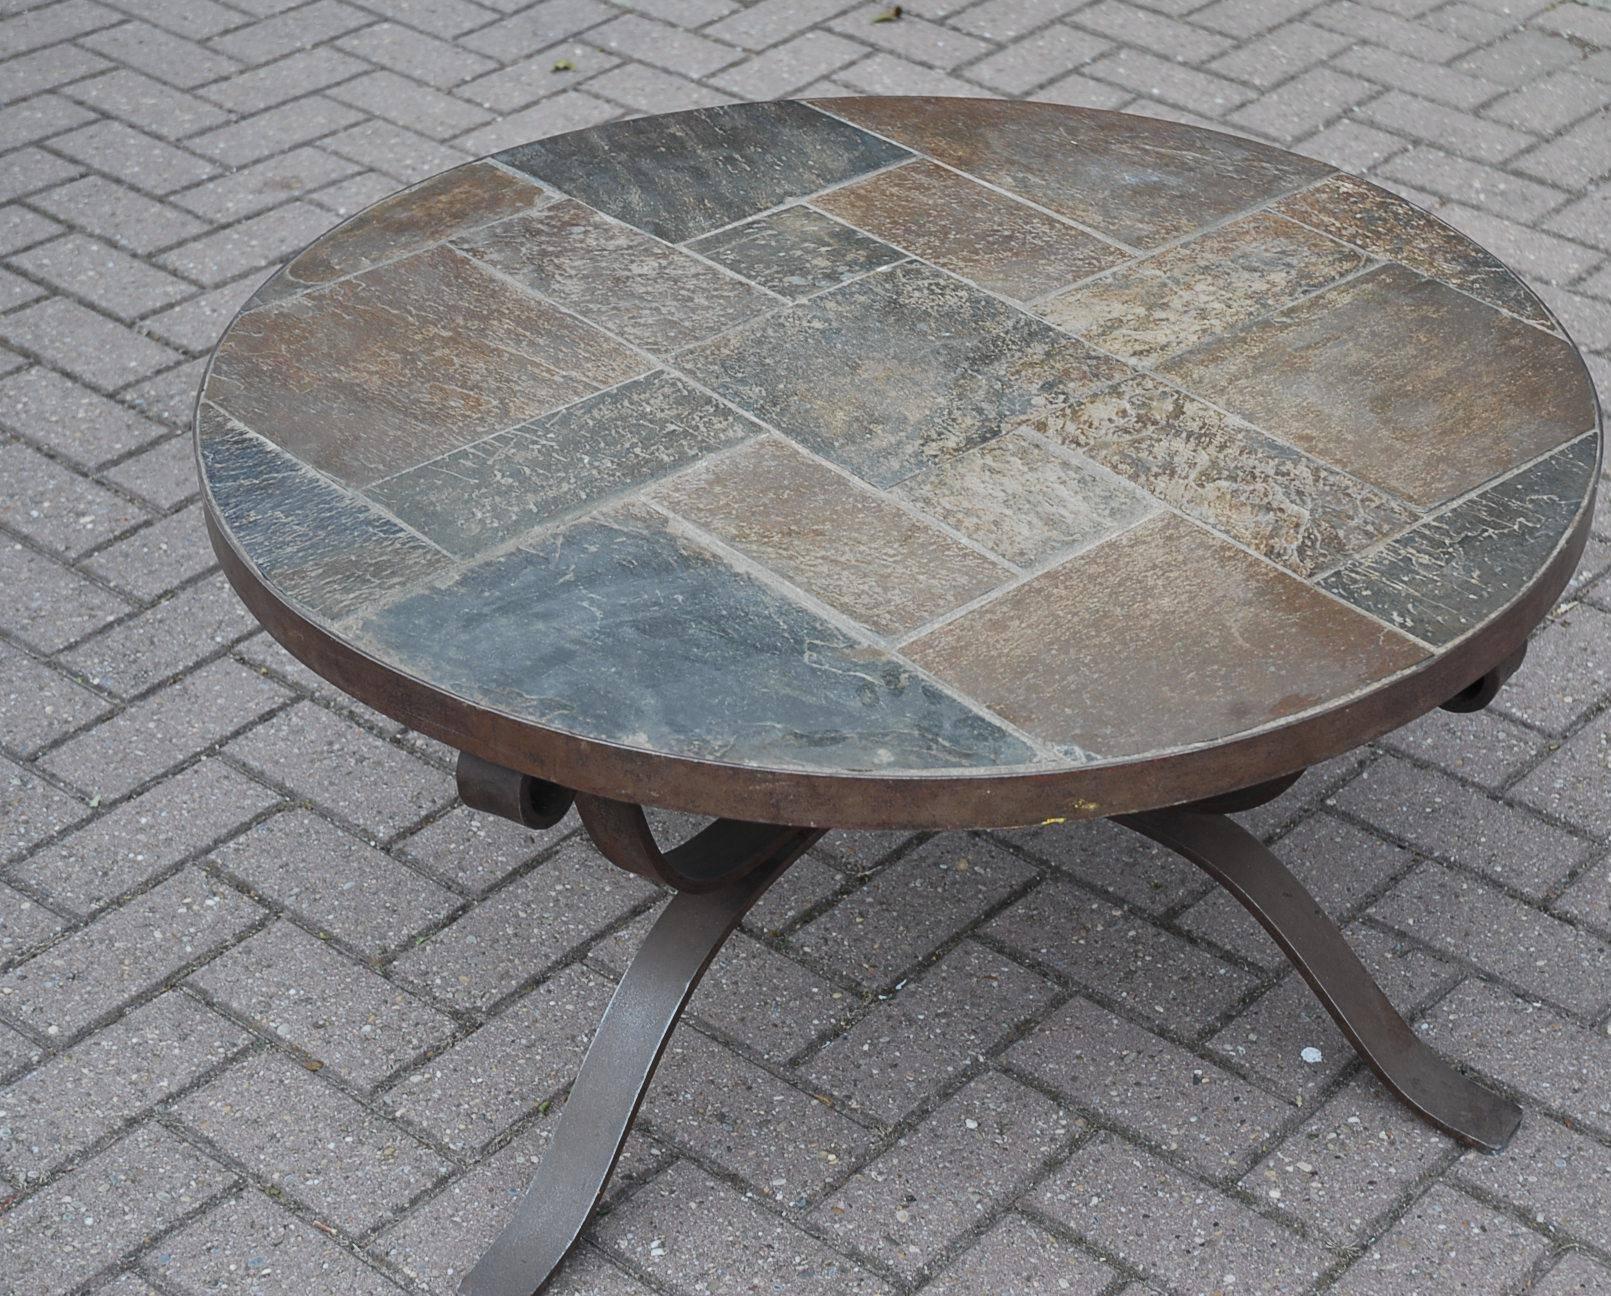 A sturdy and handmade coffee table from circa 1950.

This heavy and robust table comes with a wrought iron Art base and a round slate top. Undeniable quality craftsmanship that will last for centuries.

If you like this, coffee table as much as we